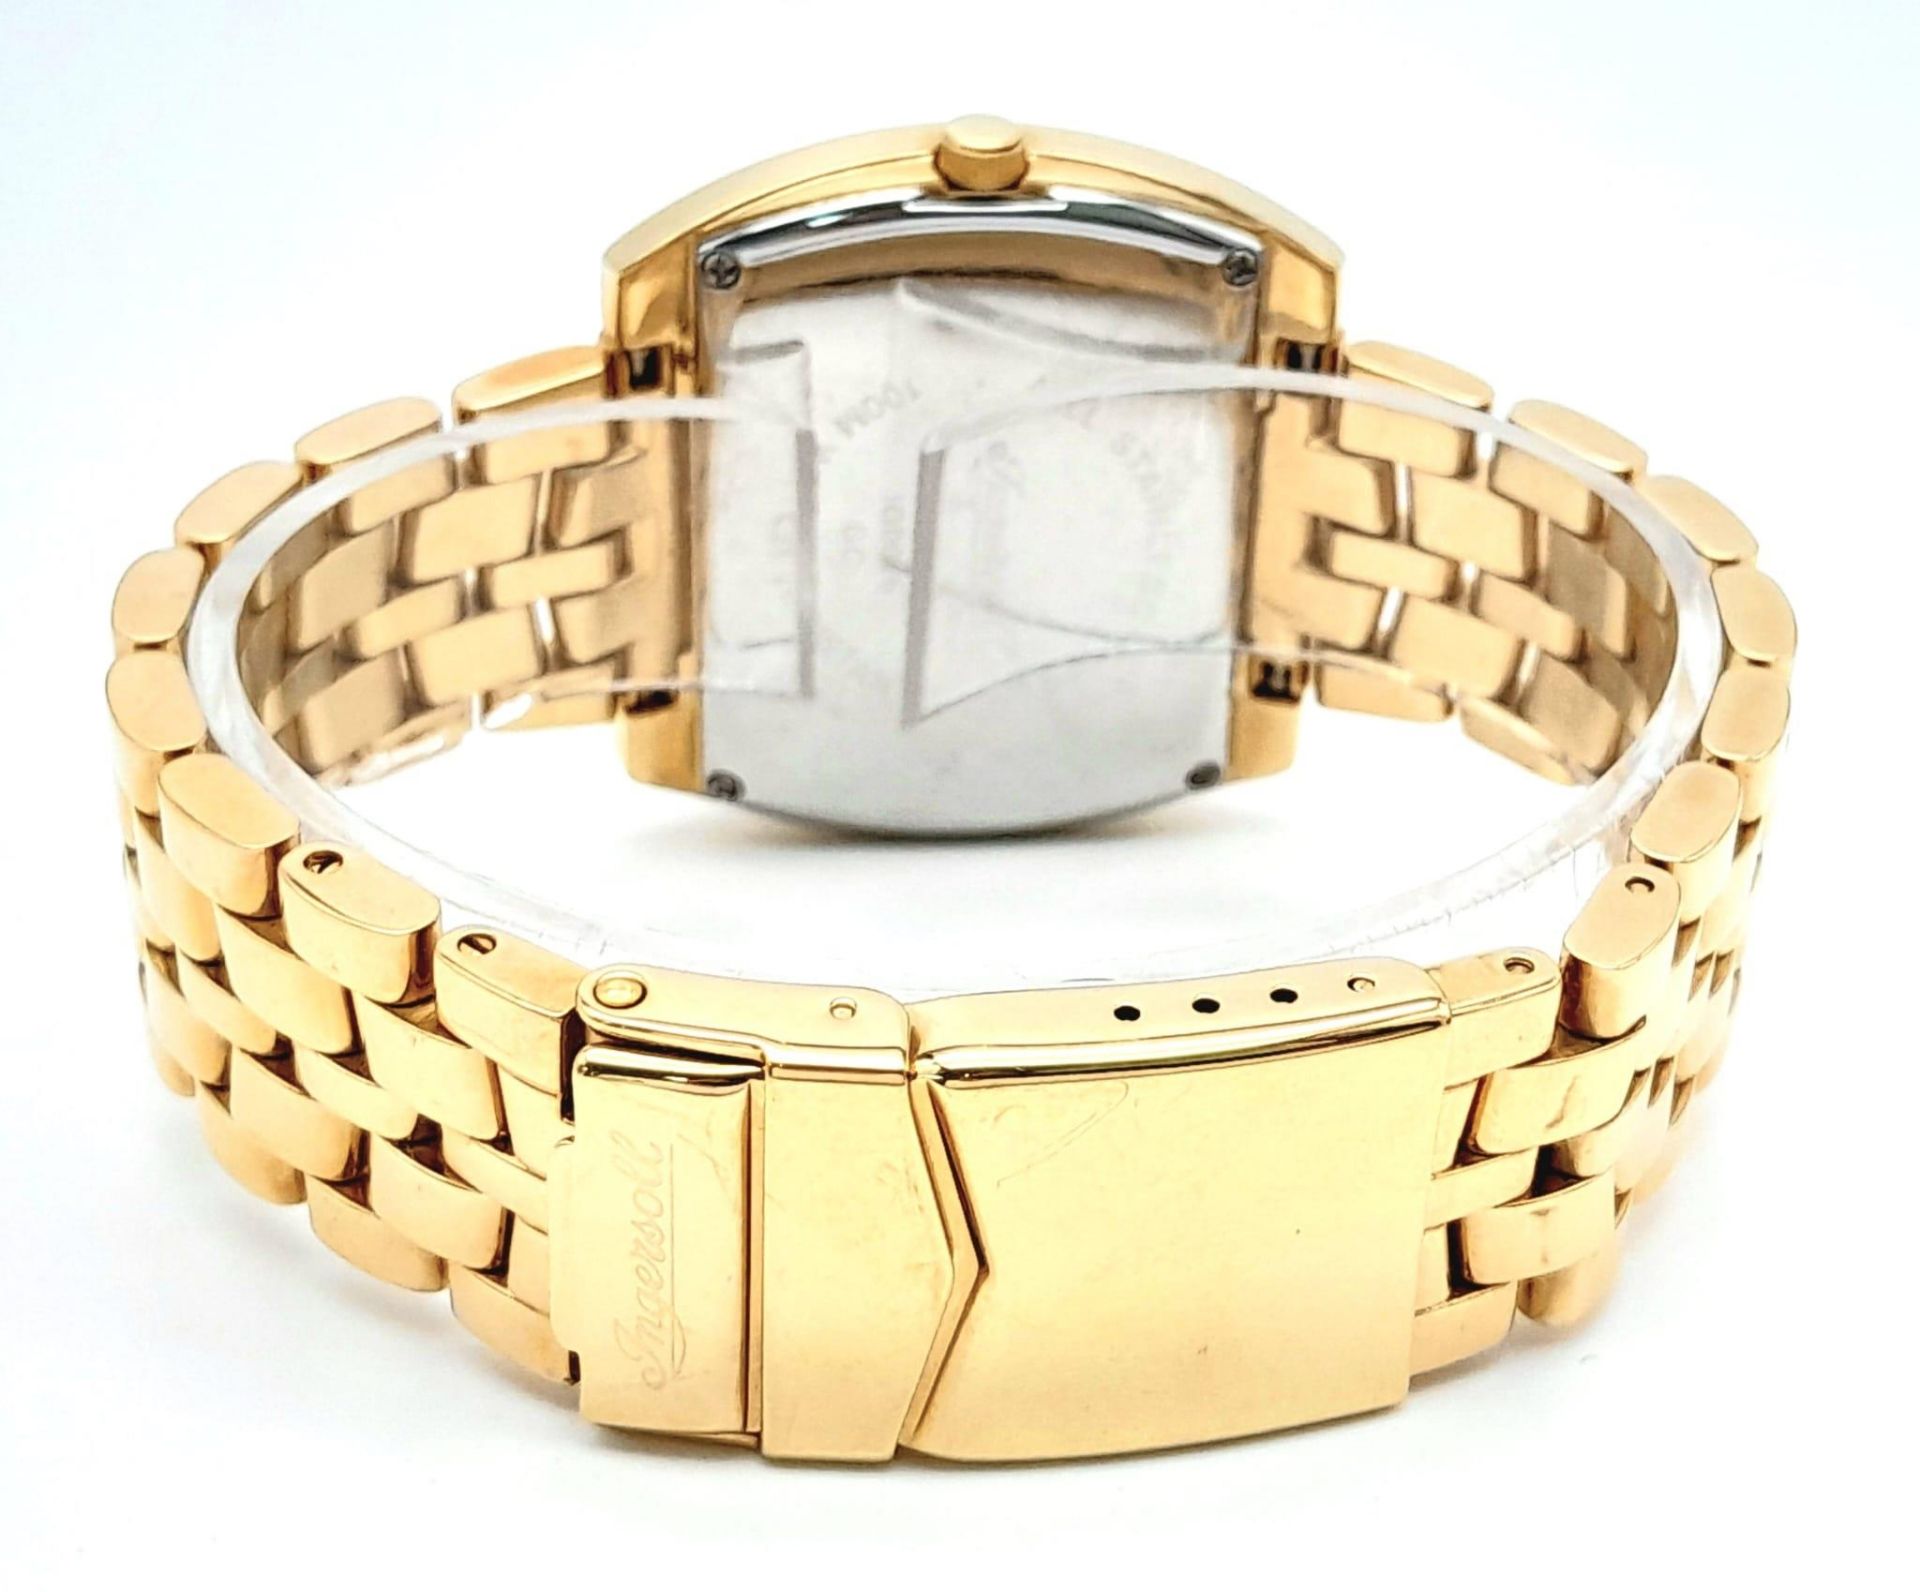 An Ingersoll Gold Plated Stone Set Quartz Ladies Watch. Gold plated bracelet and case - 38mm. - Image 4 of 6